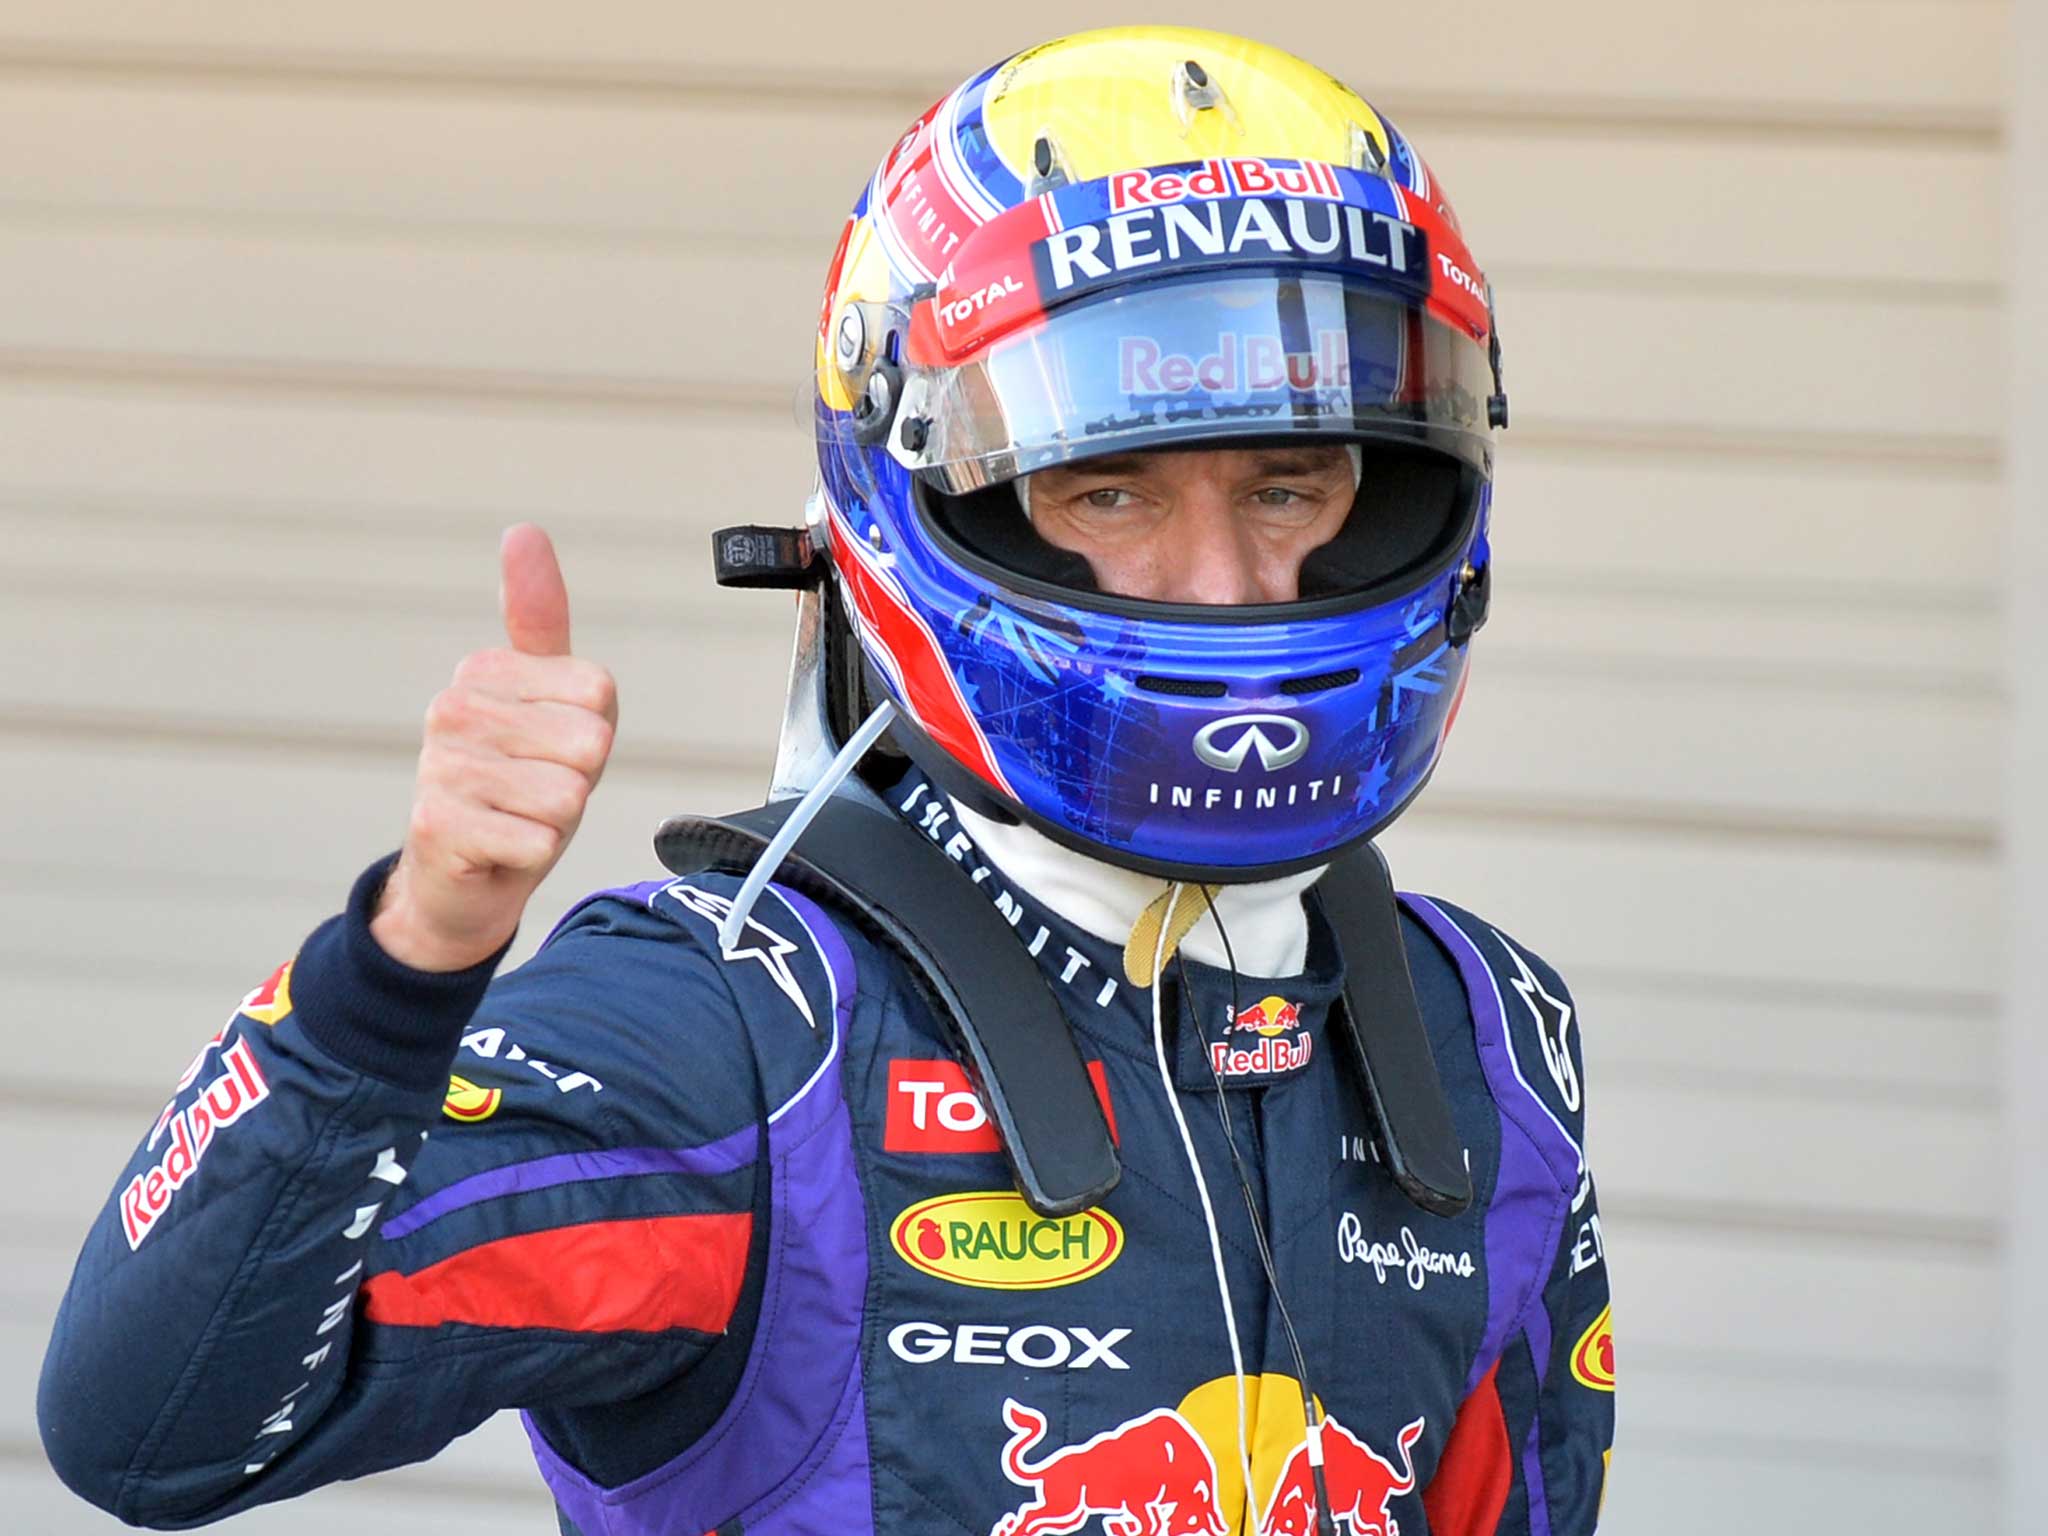 Webber pulled off a major surprise in bringing an end to Vettel's dominant run.